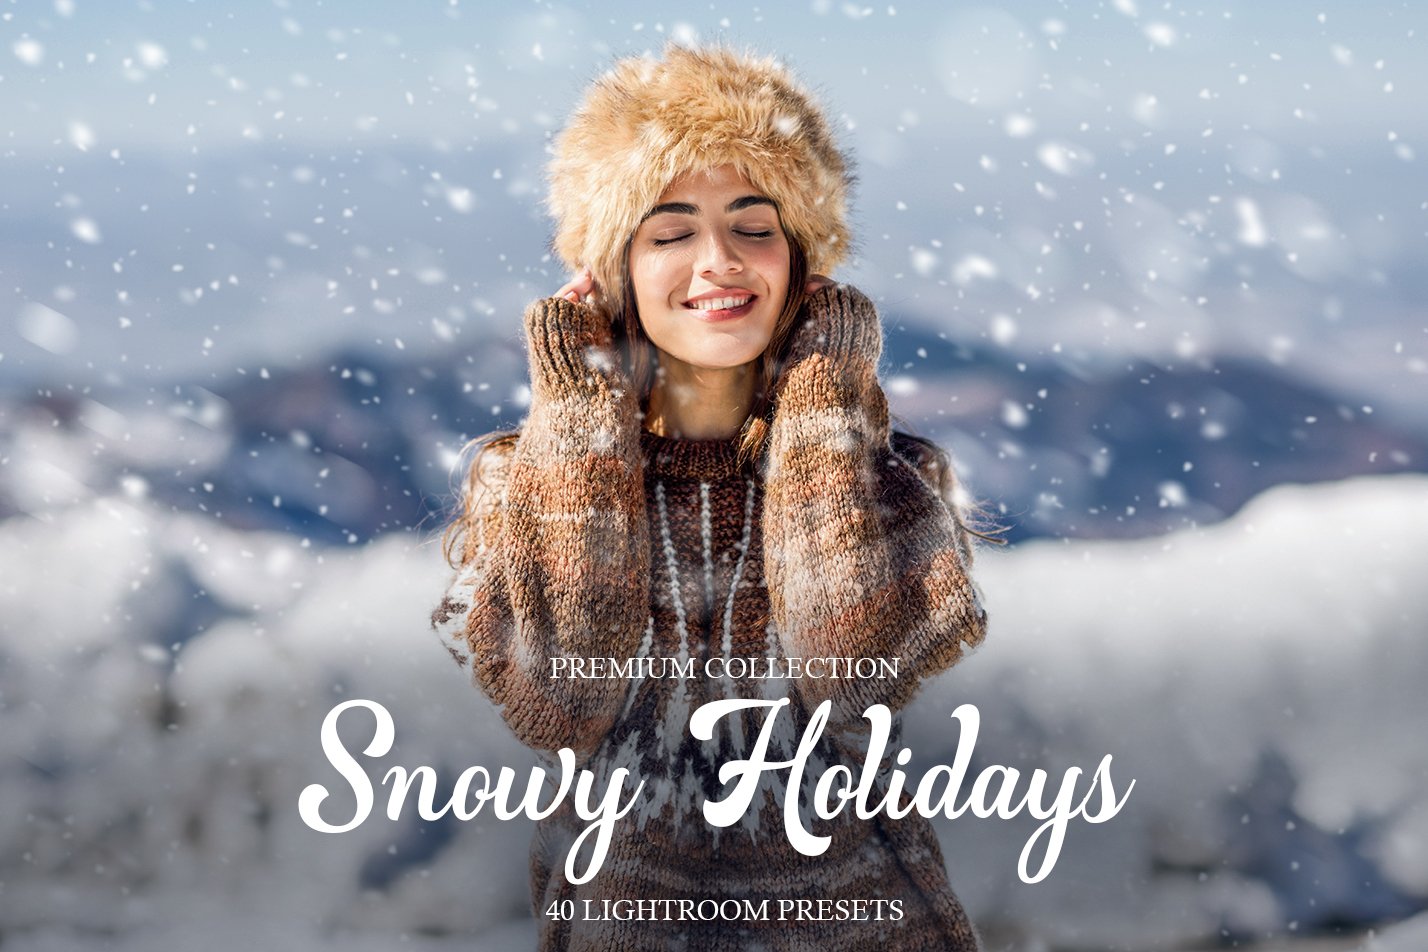 Snowy Holidays Presets for Lightroomcover image.